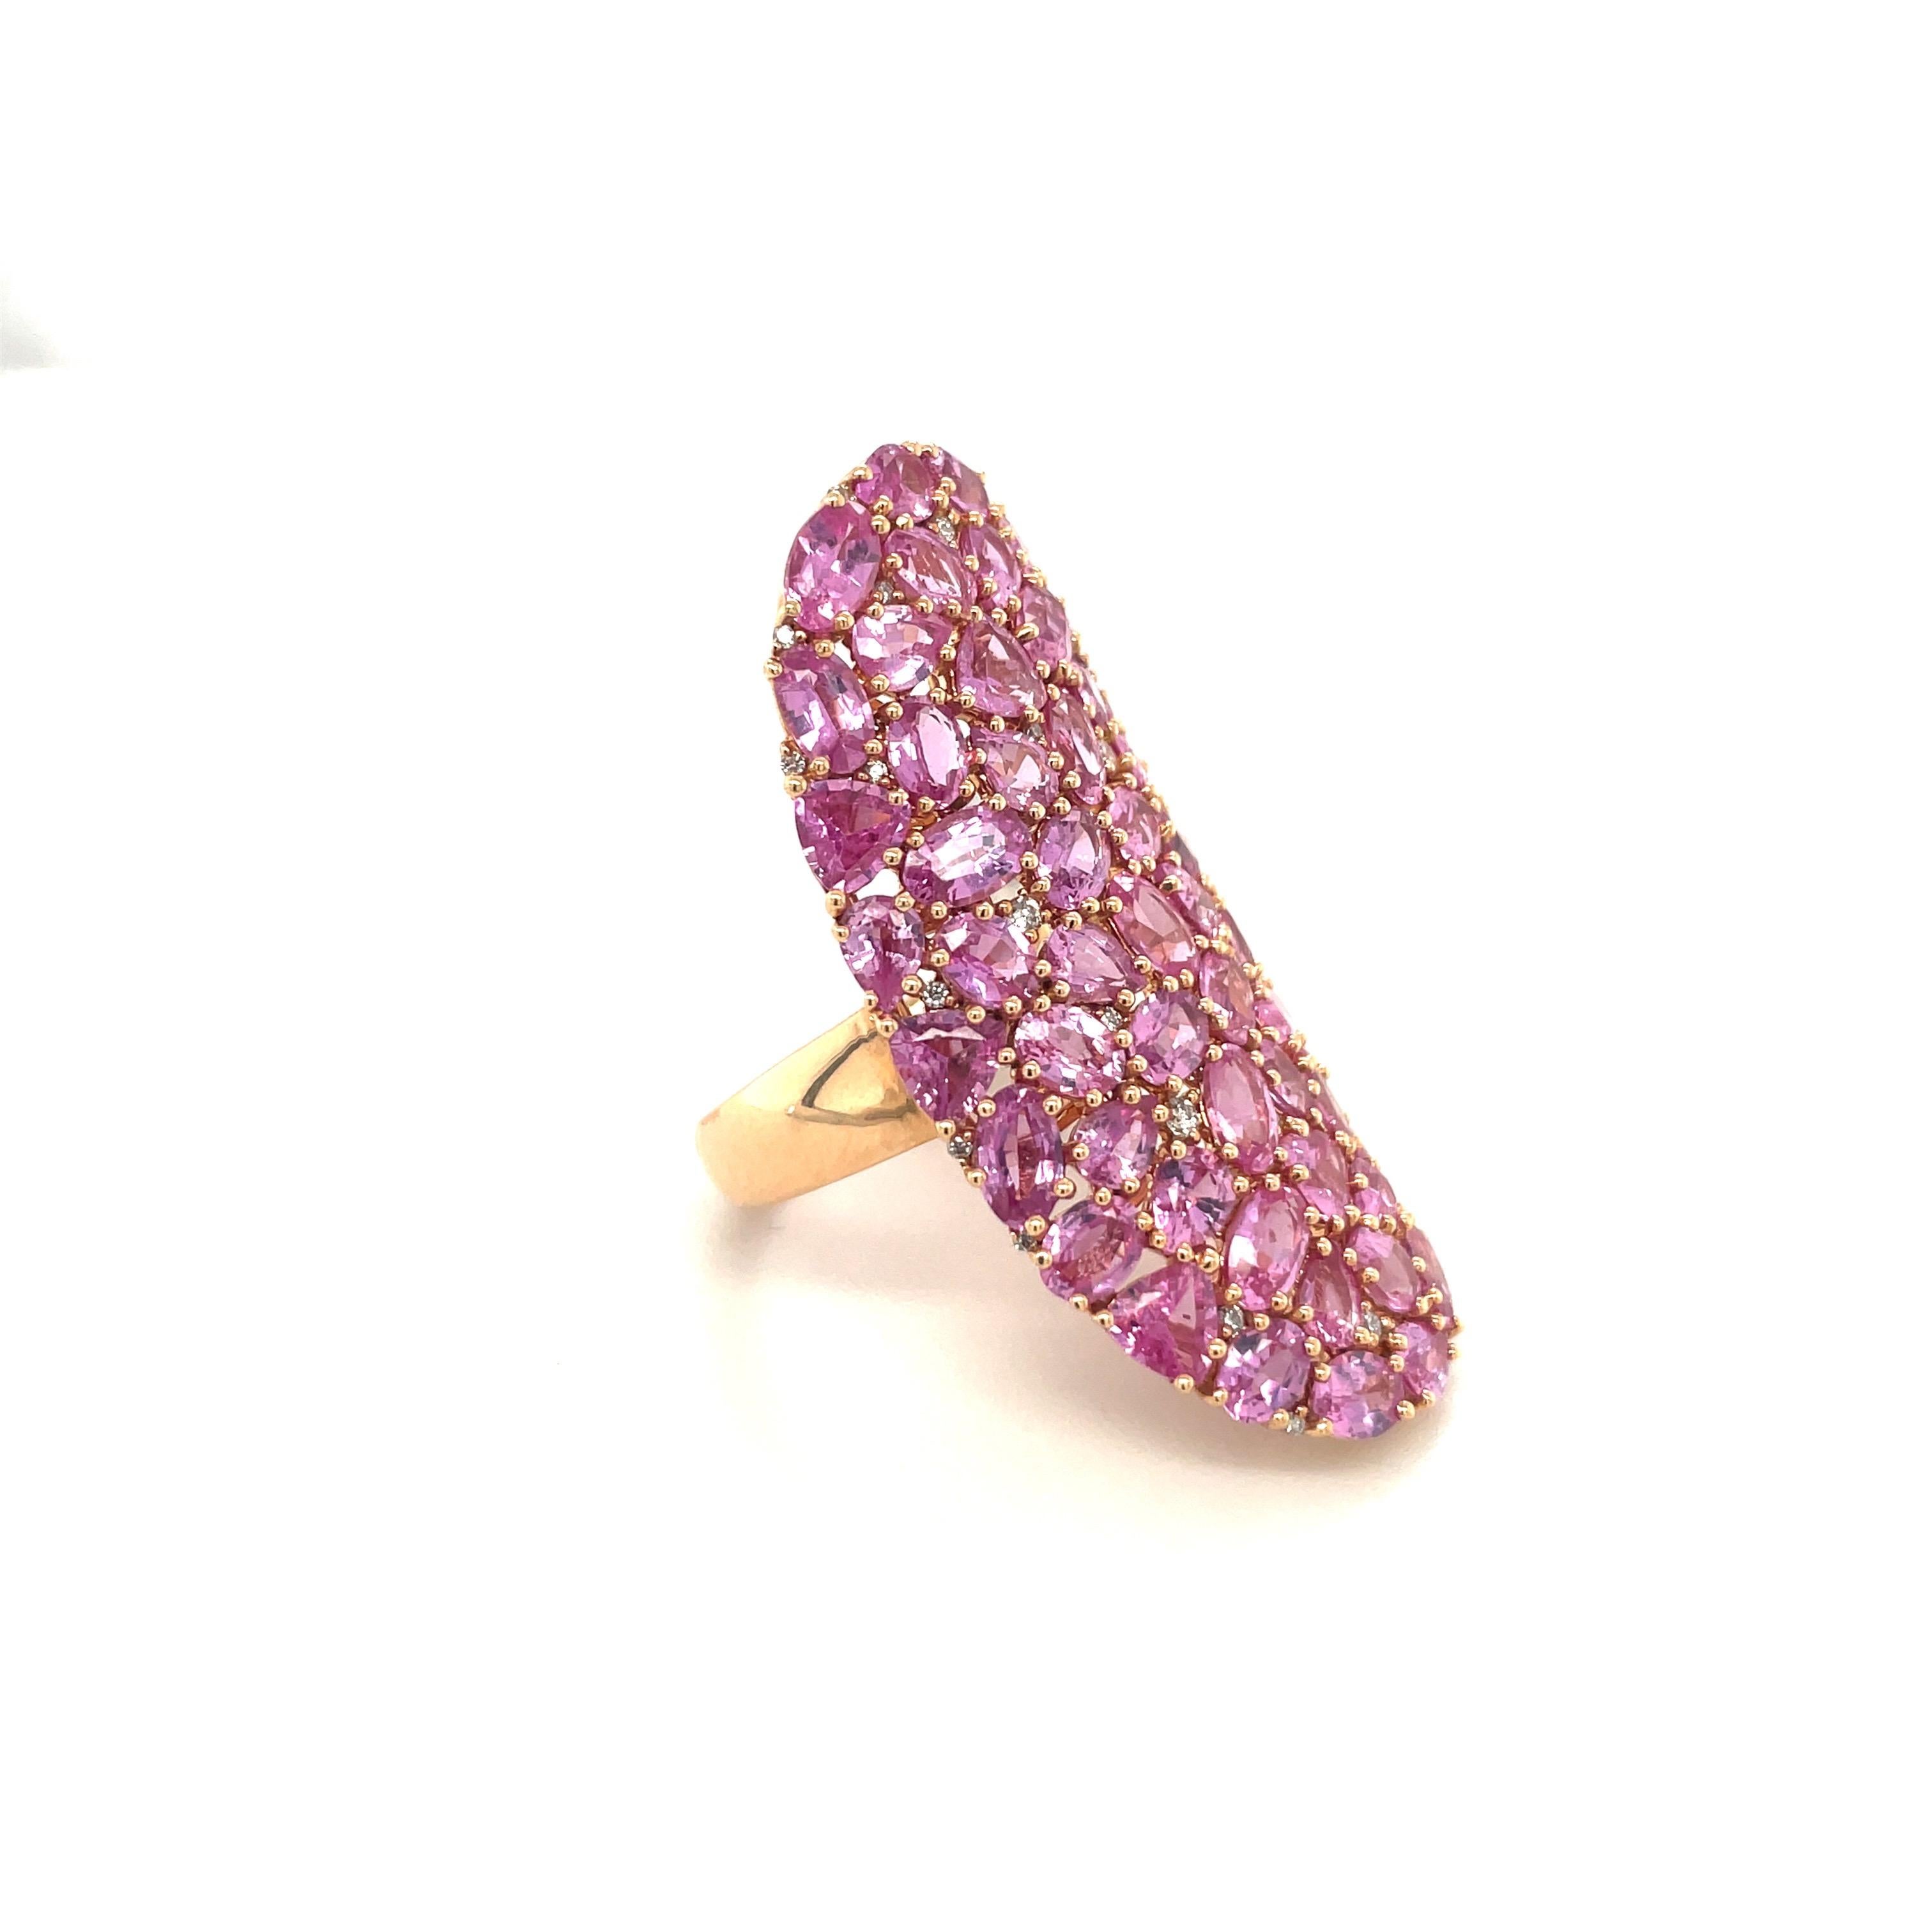 This magnificent 18 karat oval rose gold ring is beautifully set with 11.31 carats of oval pink sapphires. Round white diamonds 0.17 carats are sprinkled throughout. The oval ring measures 1.5